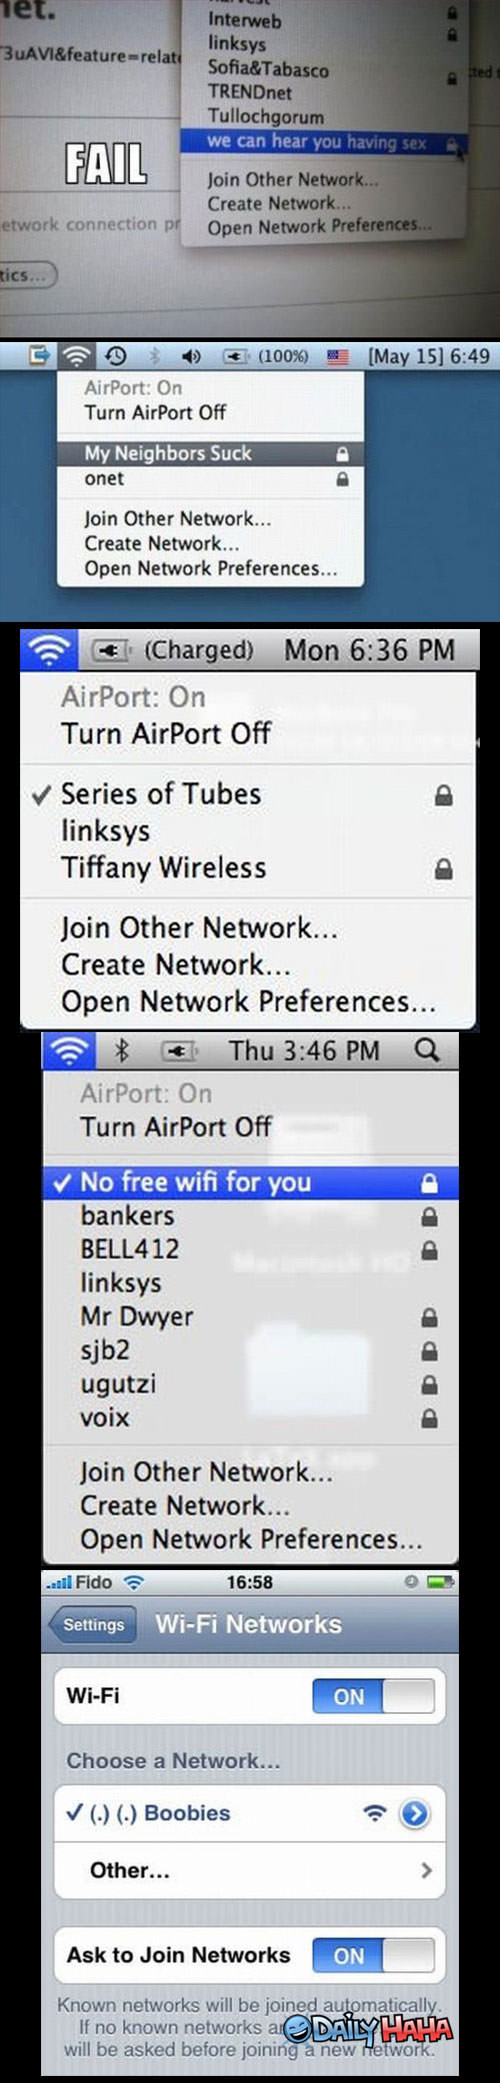 WiFi Connection funny picture